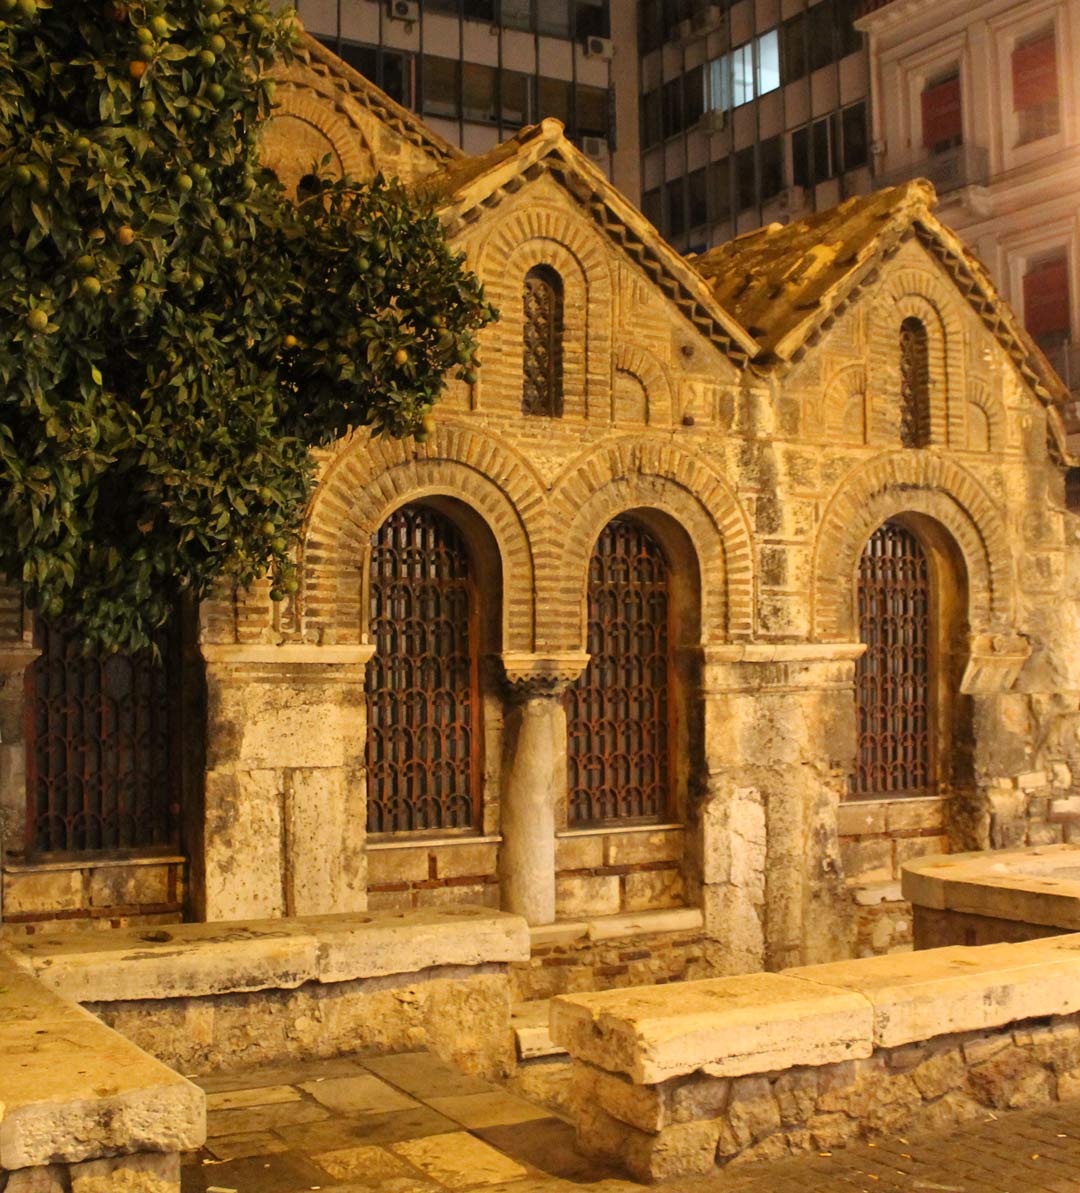 Church in the Plaka, or old city, area of Athens